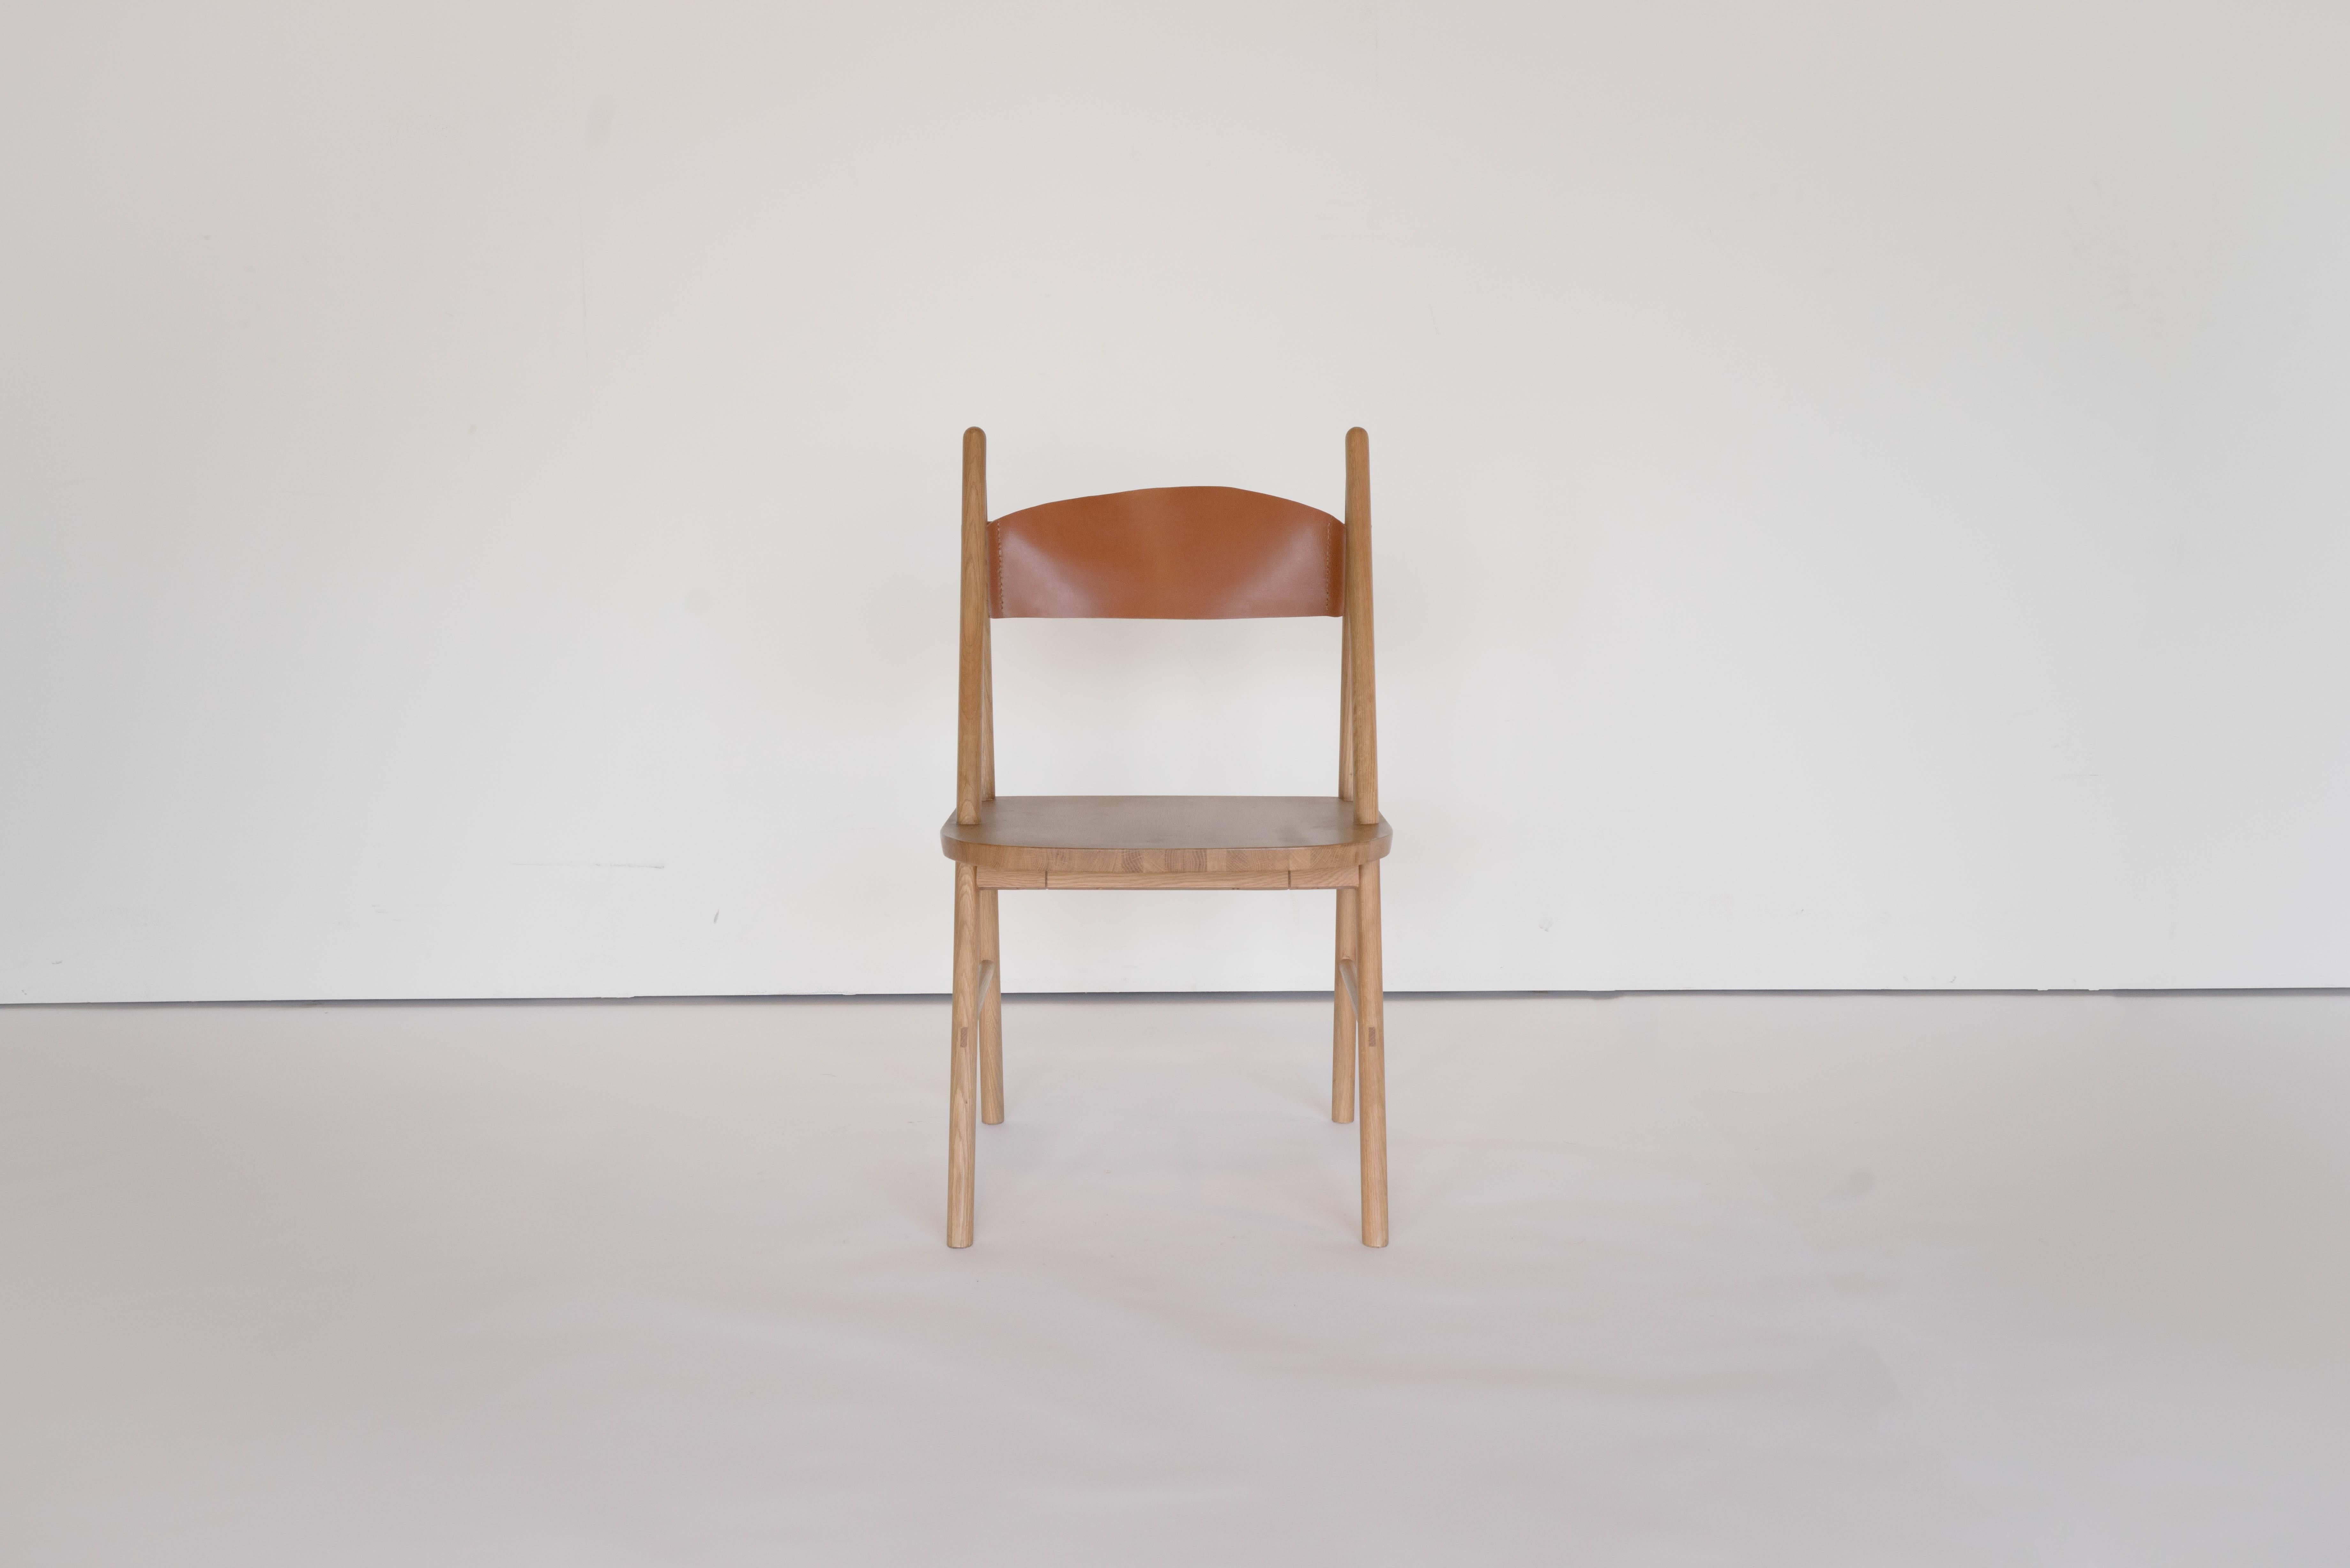 Sun at Six is a contemporary furniture design studio that works with traditional Chinese joinery masters to handcraft our pieces using traditional joinery. A concave leather back makes this dining chair a good choice for lounging and long